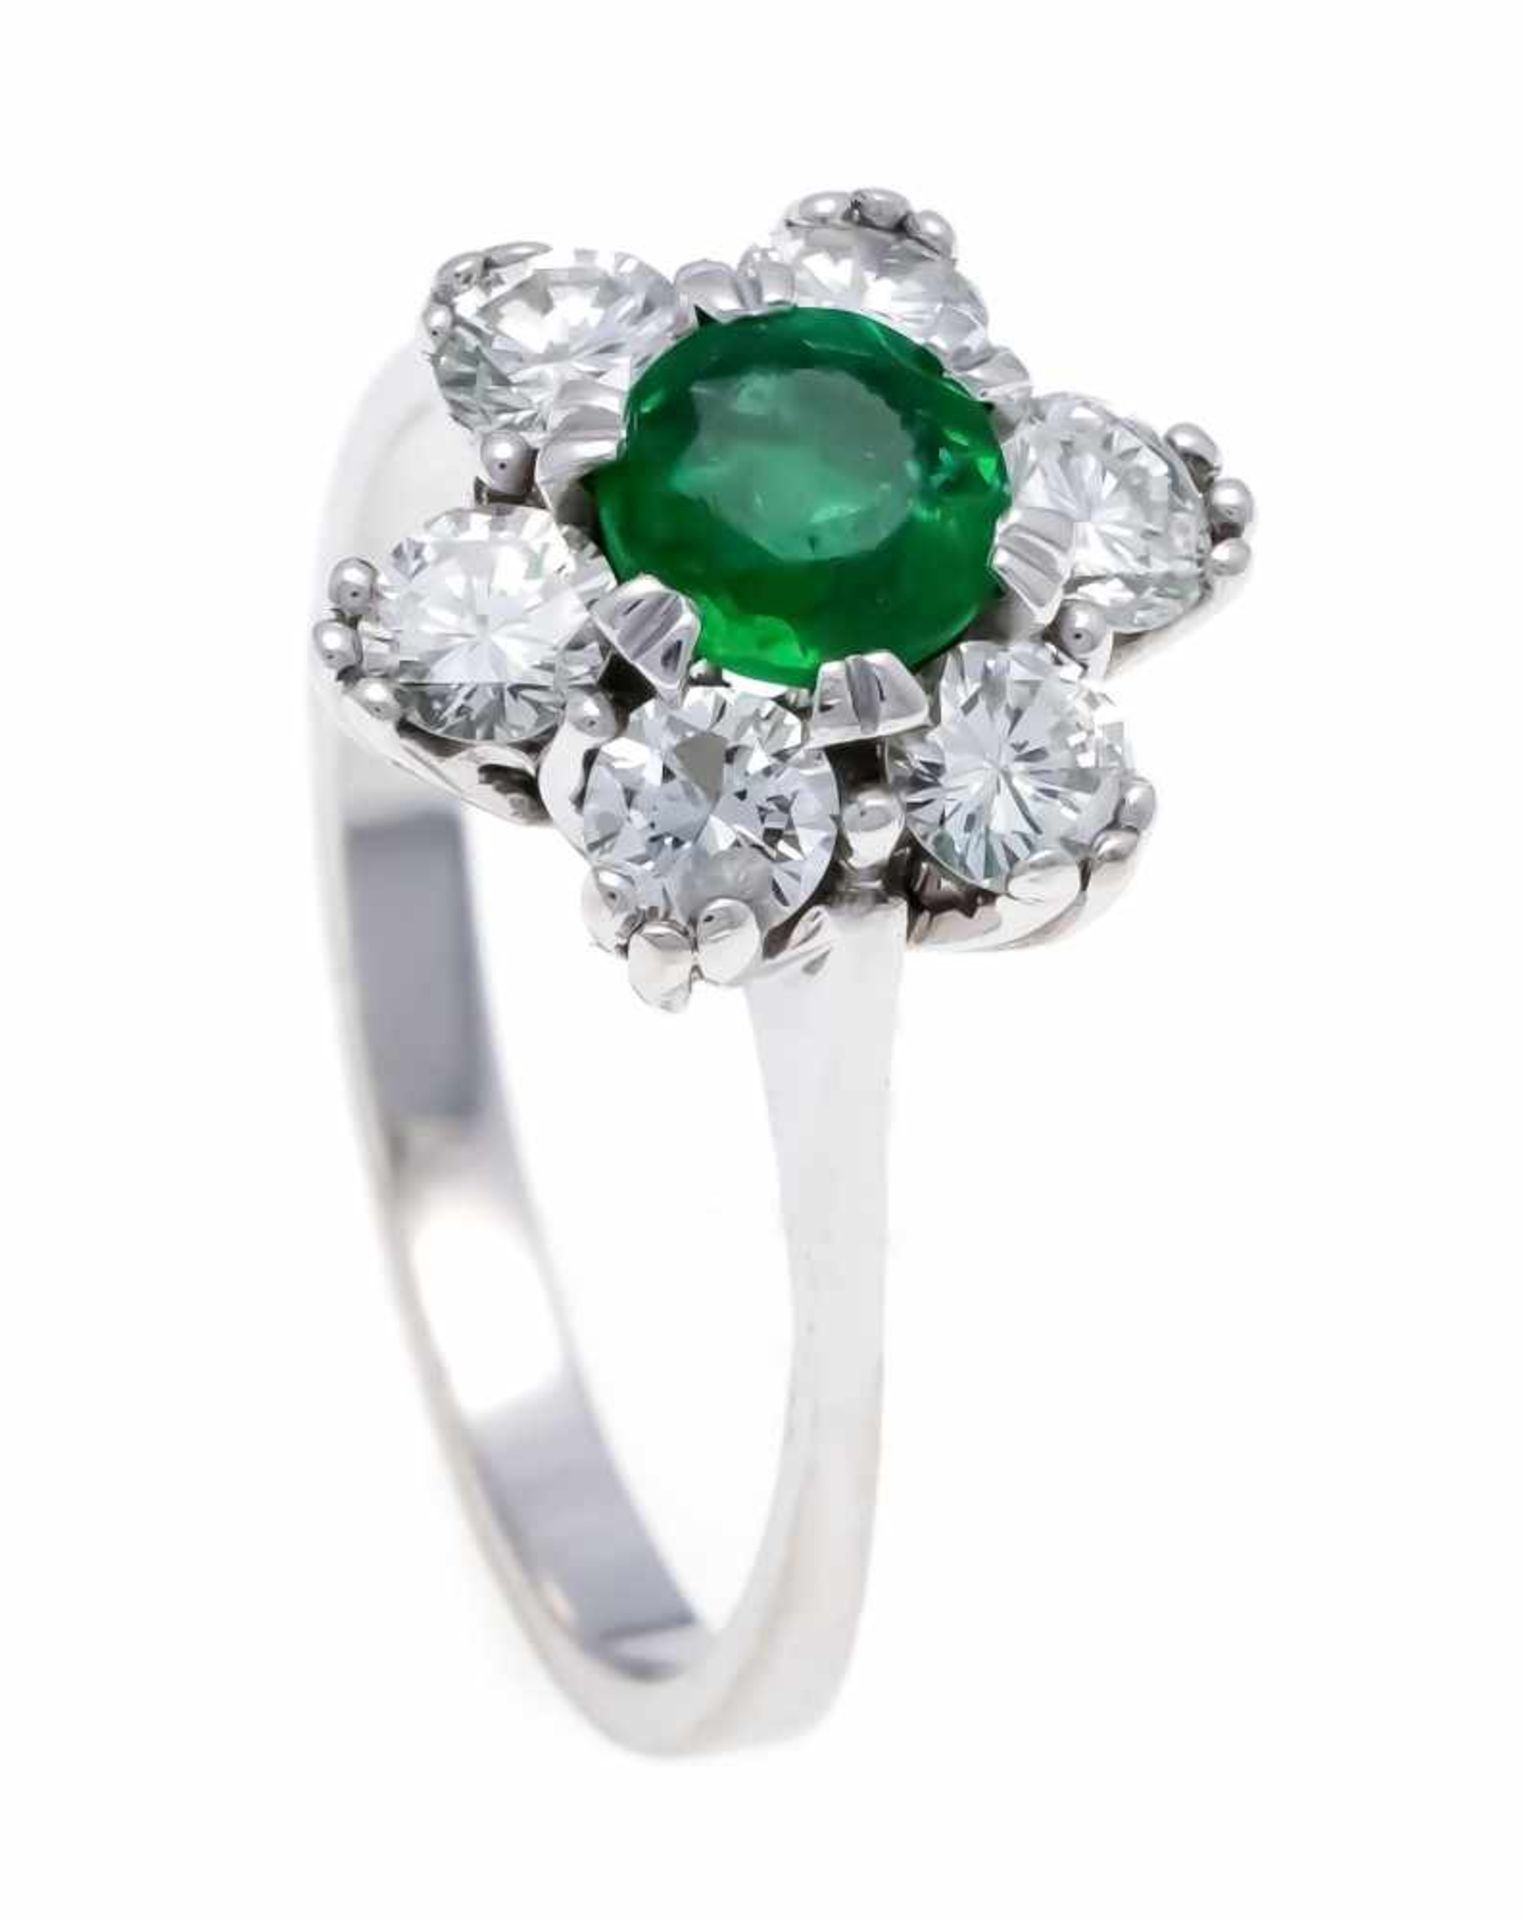 Emerald-Brilliant-Ring WG 585/000 with a round faceted emerald 5 mm in very good color and